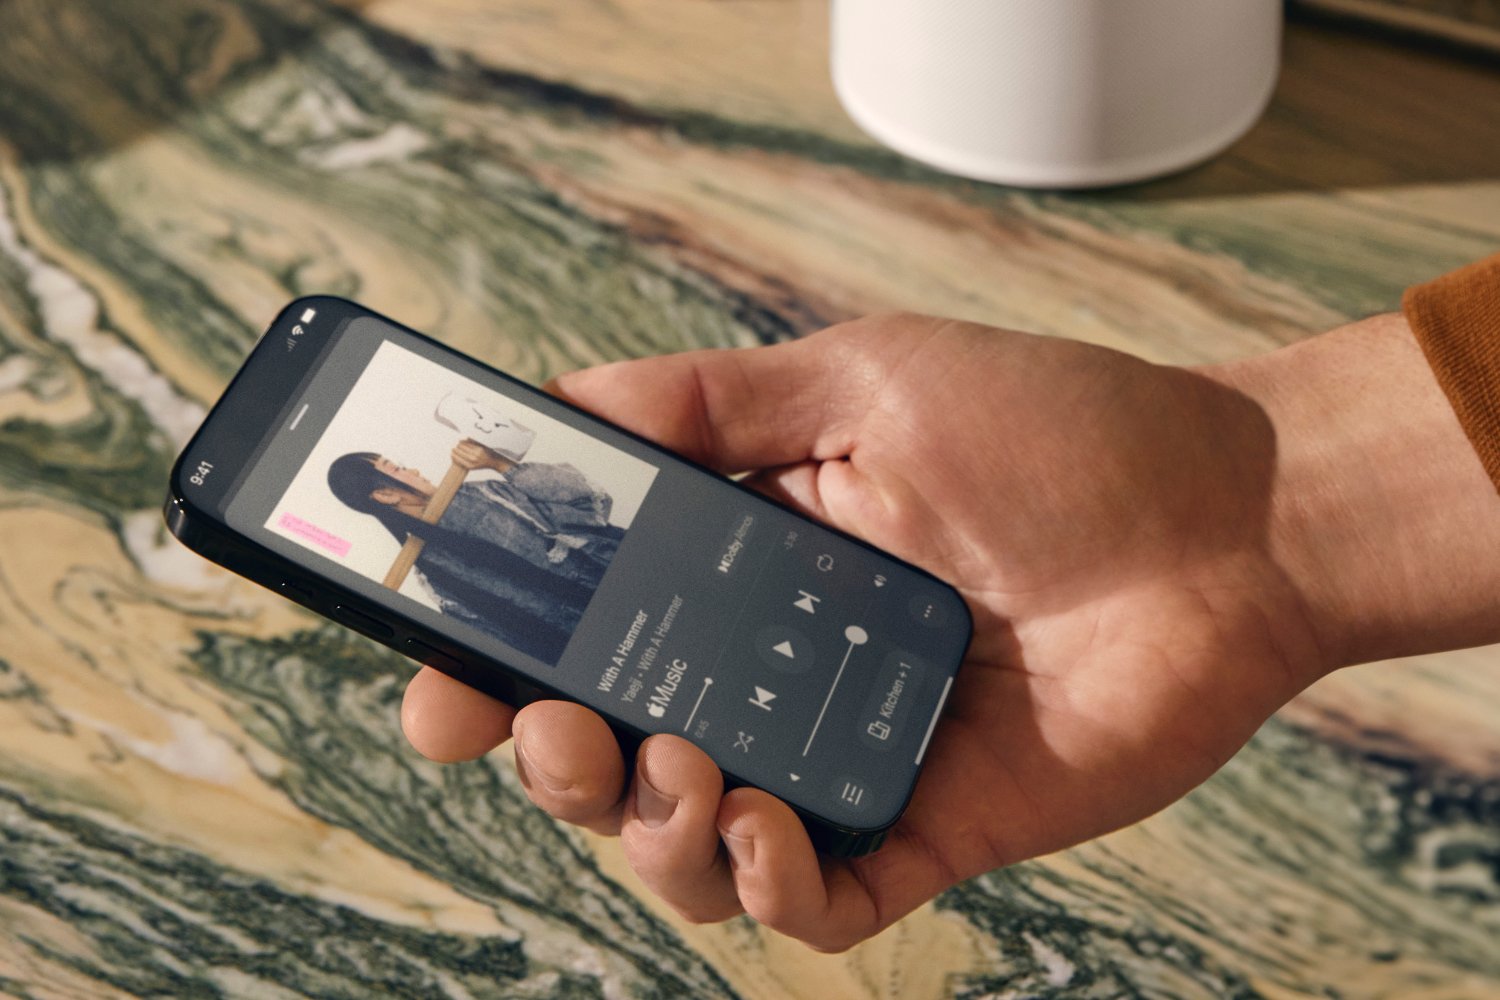 New Sonos app angers many users